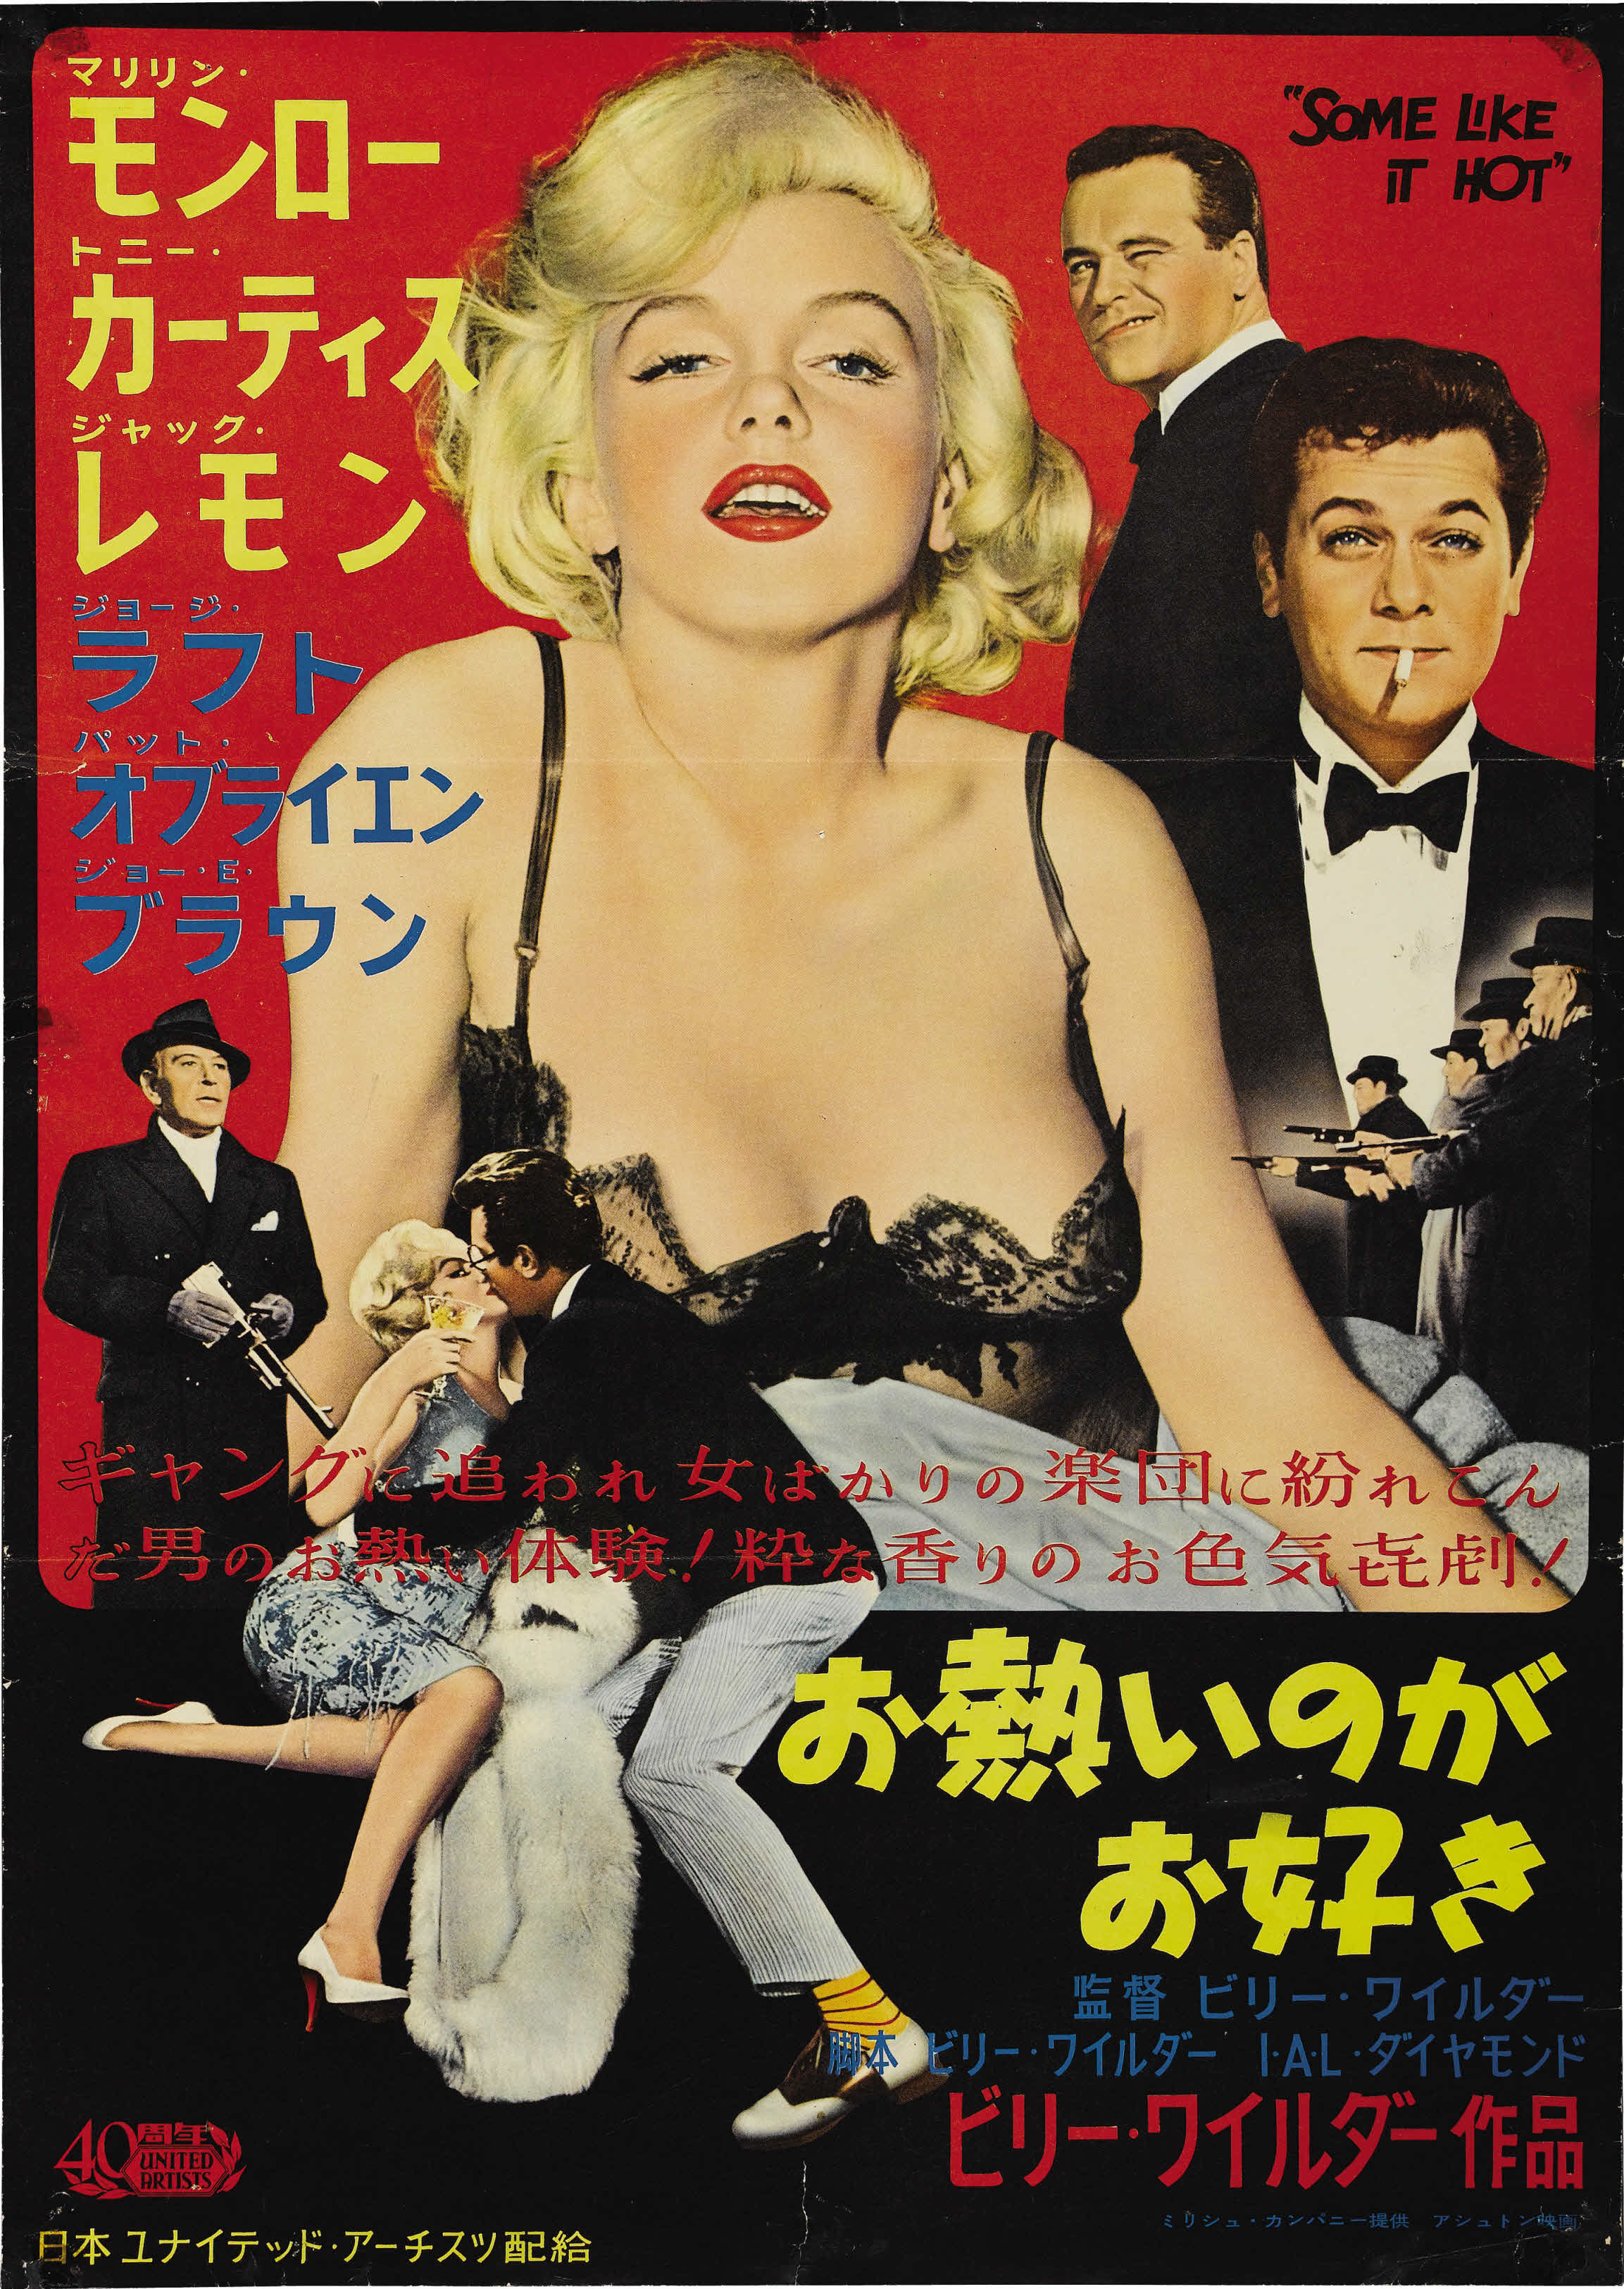 Some posters. Some like it hot 1959 poster. В джазе только девушки плакат.